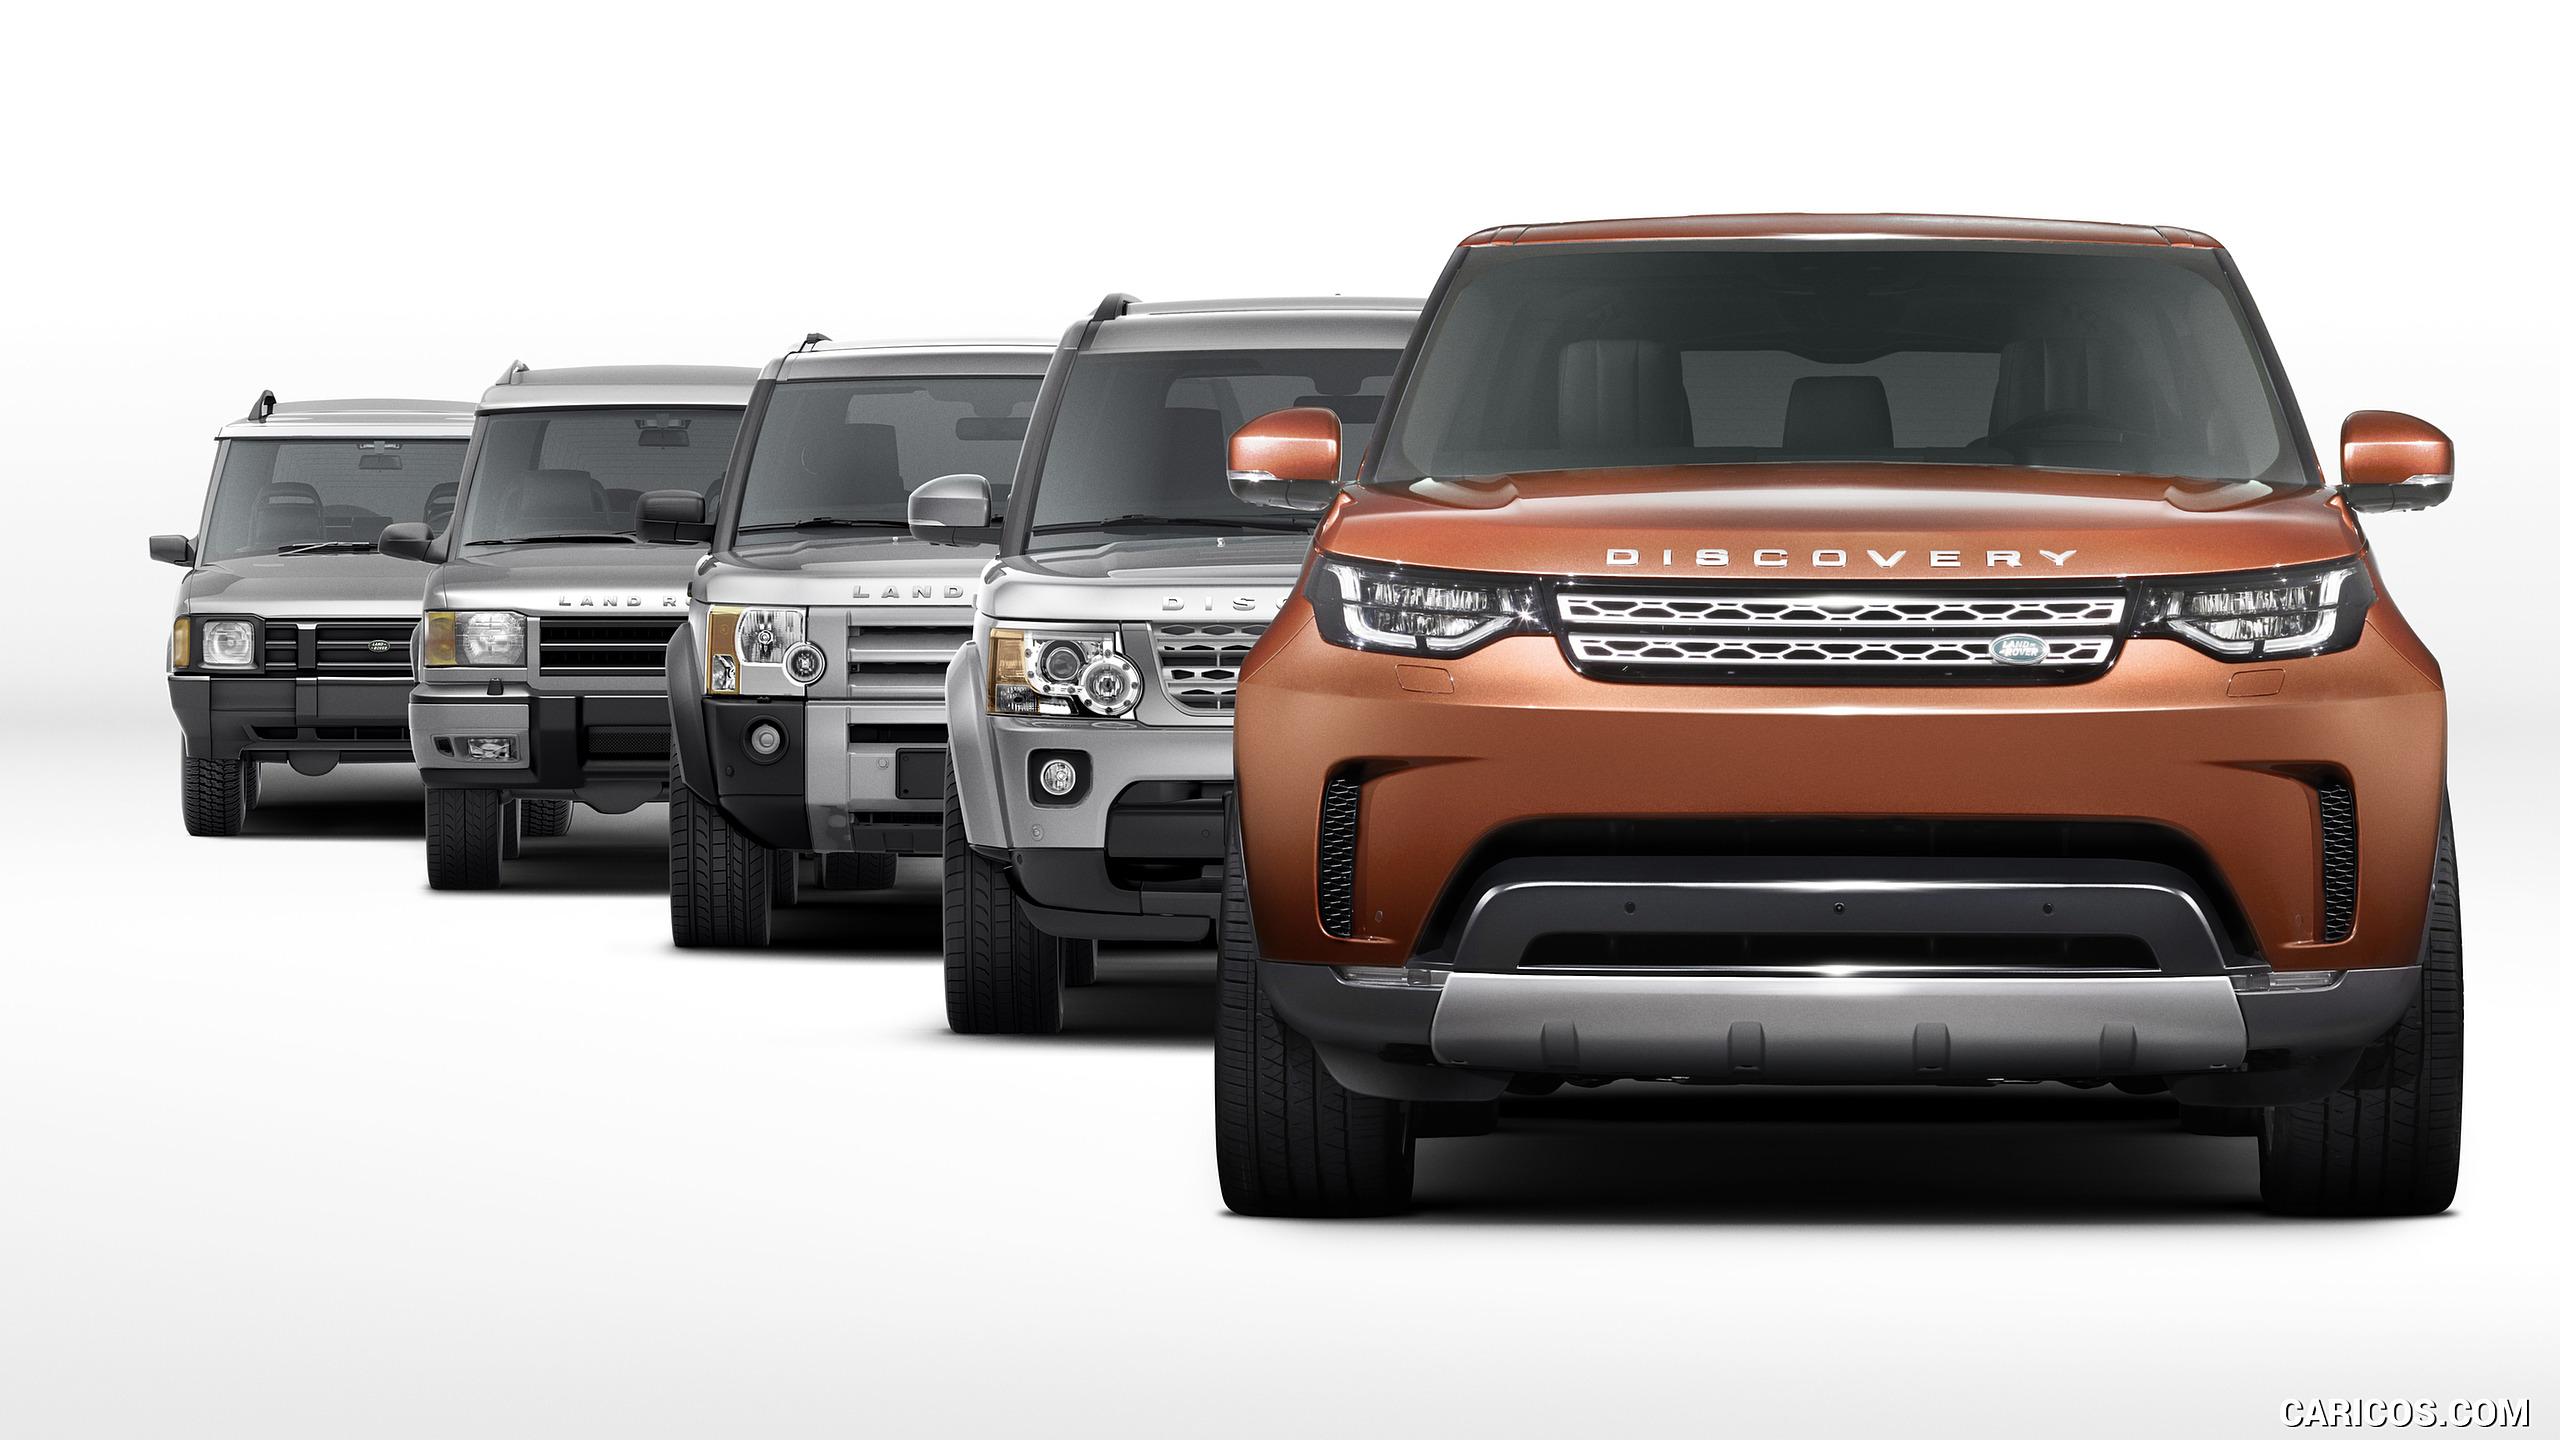 Land Rover Discovery. HD Wallpaper